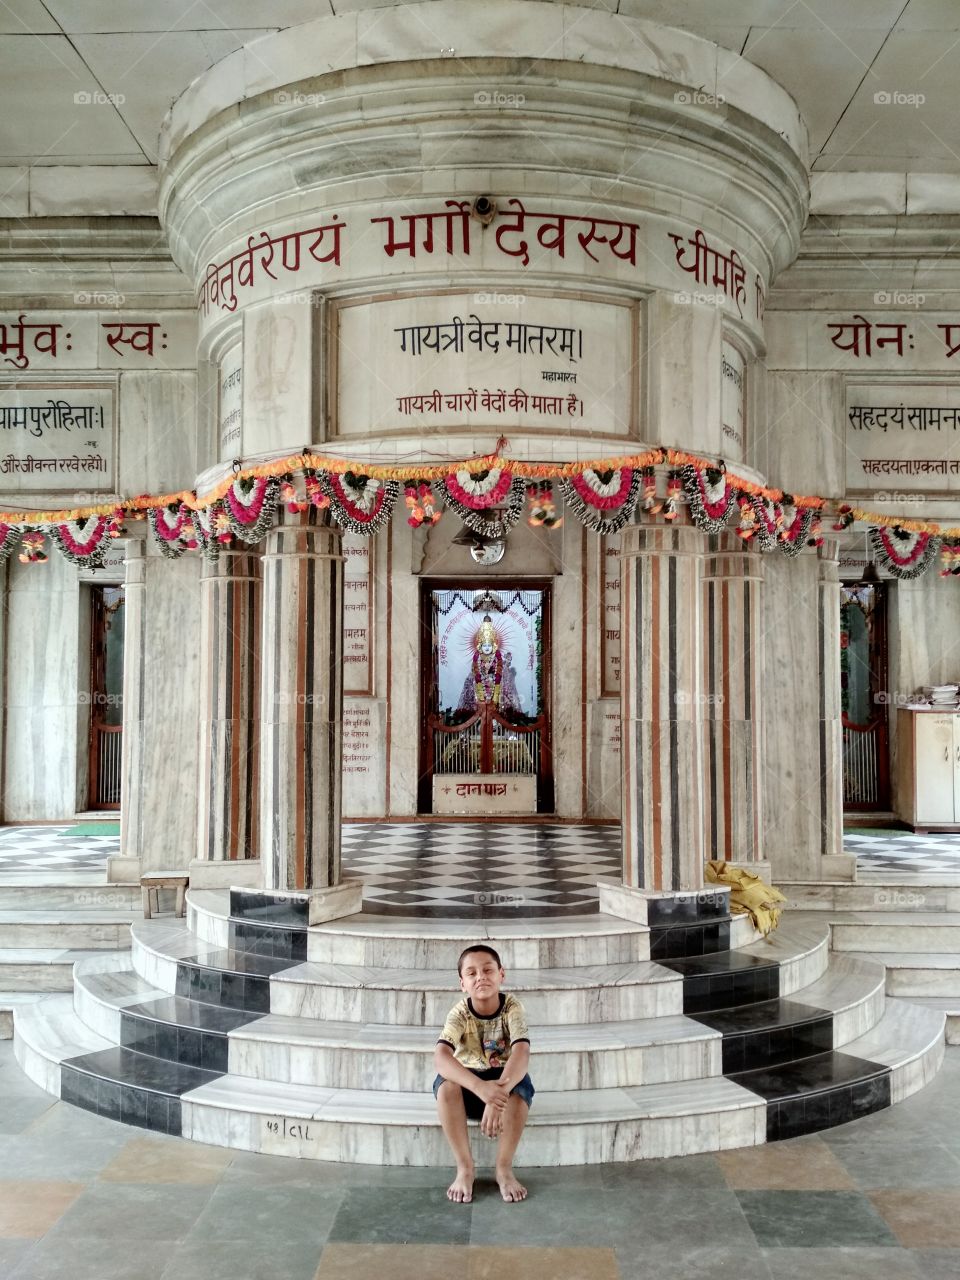 A boy in the temple